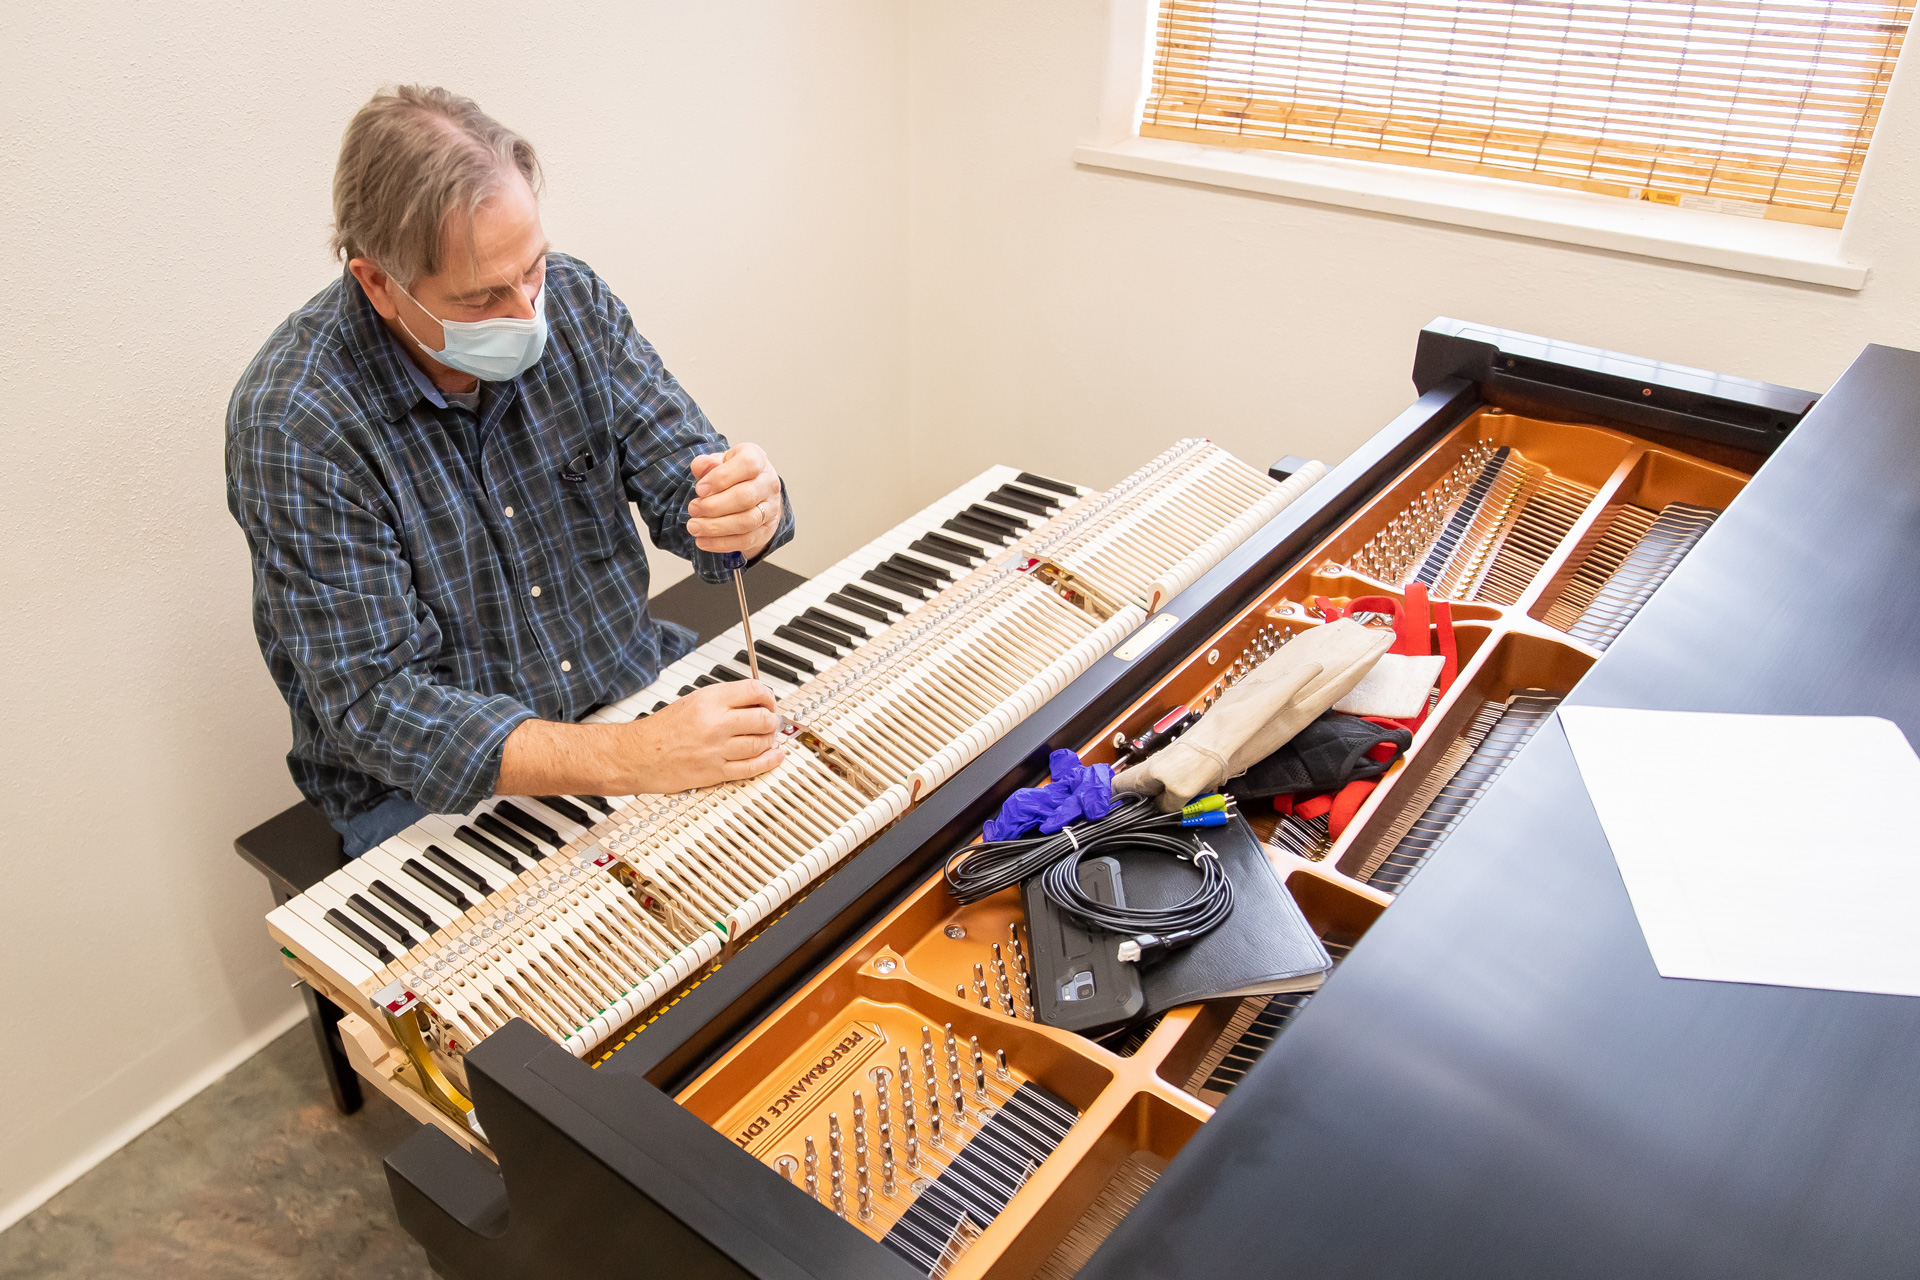 Tuning the pianos